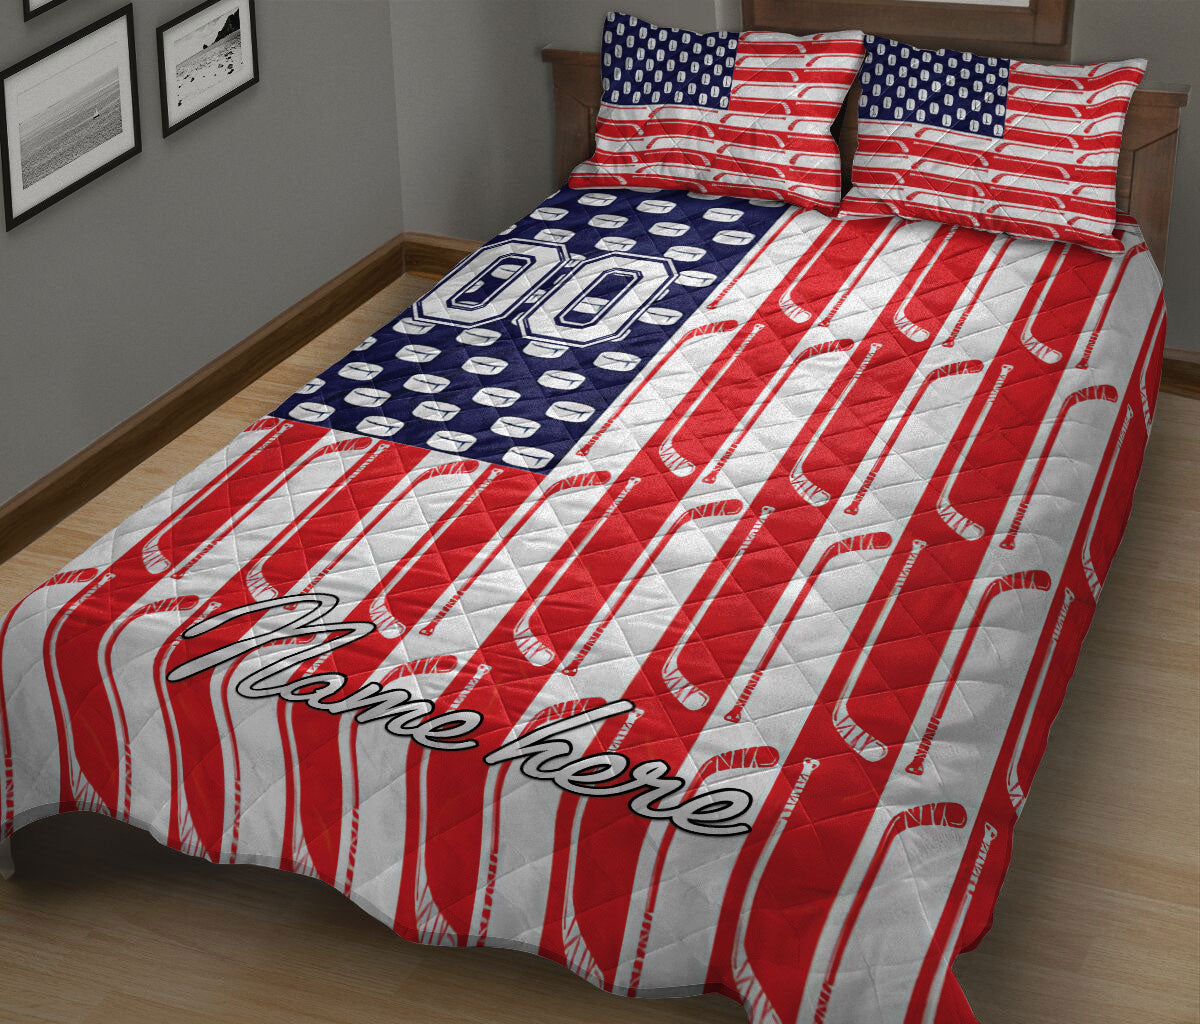 Ohaprints-Quilt-Bed-Set-Pillowcase-Hockey-Stick-Puck-Hockey-Player-America-Flag-Custom-Personalized-Name-Number-Blanket-Bedspread-Bedding-1422-King (90'' x 100'')